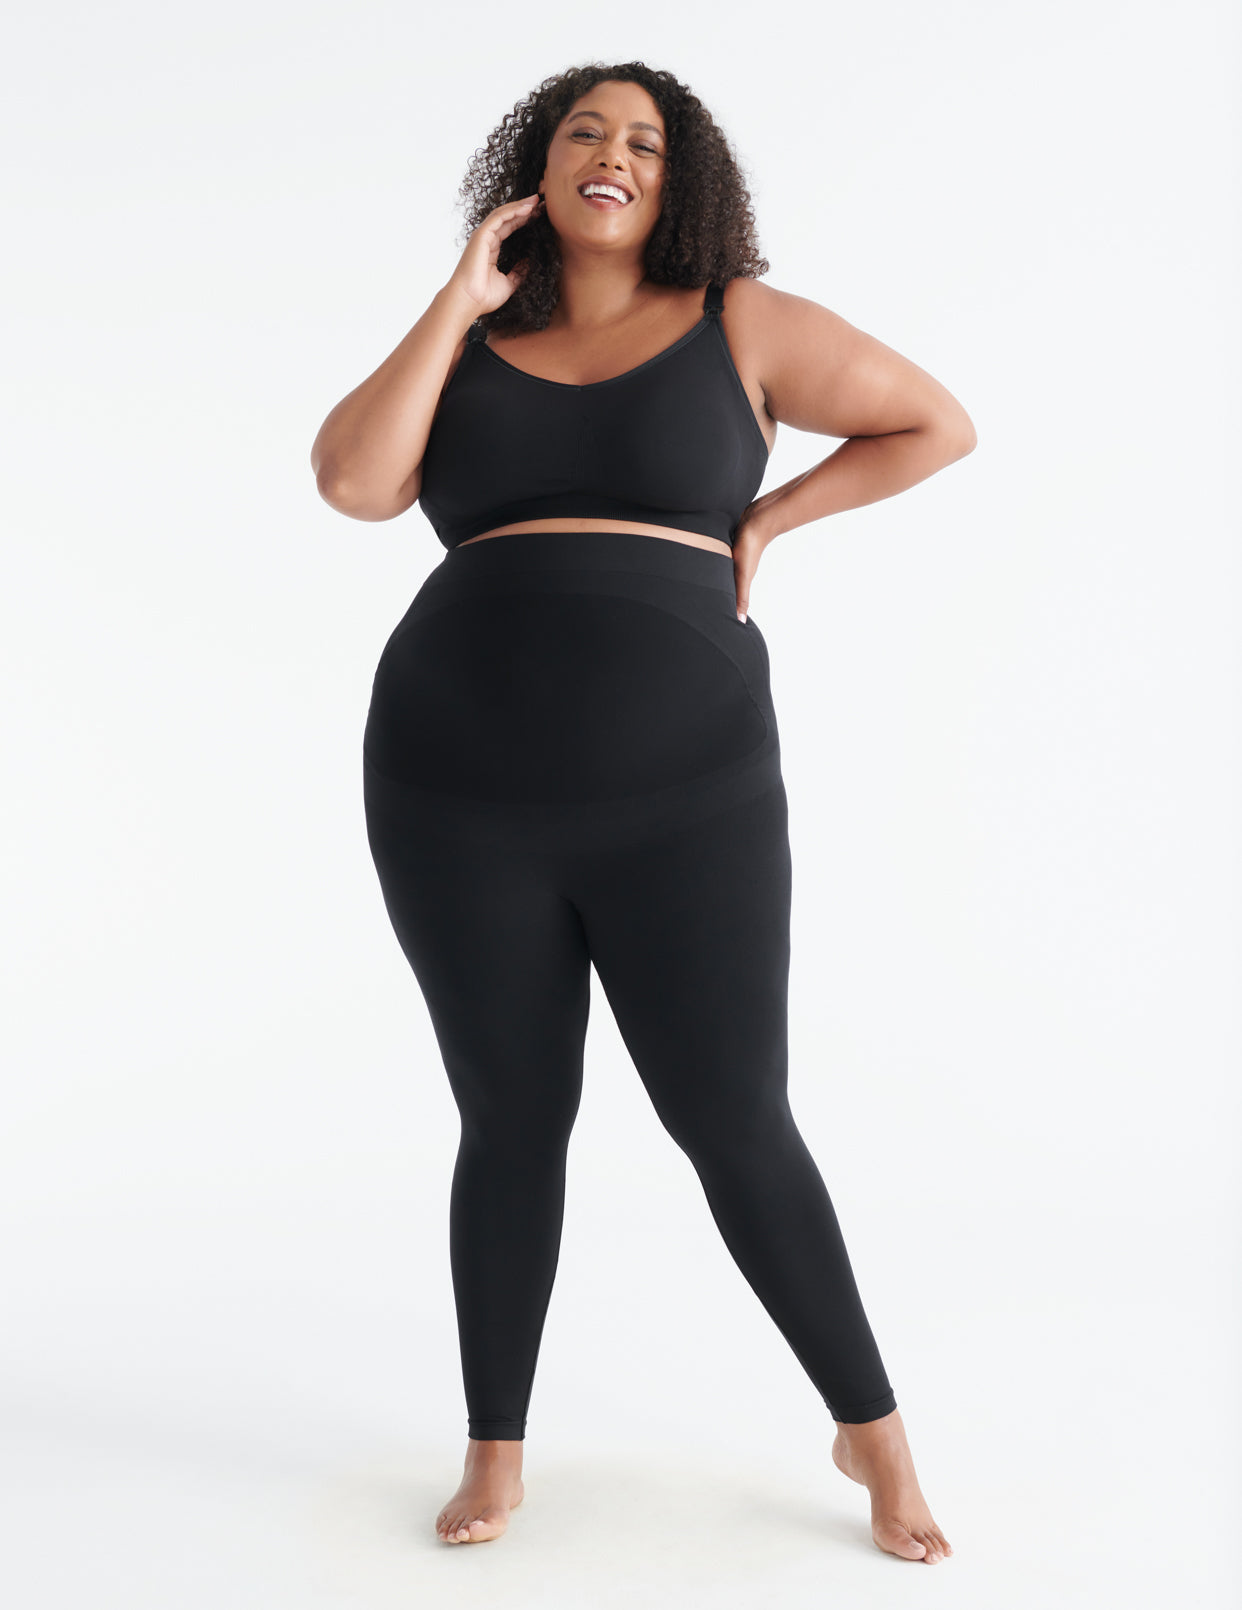 7 Affordable Workout Pieces for Instant Glam at the Gym! | Graphic leggings,  Fashion, Plus size